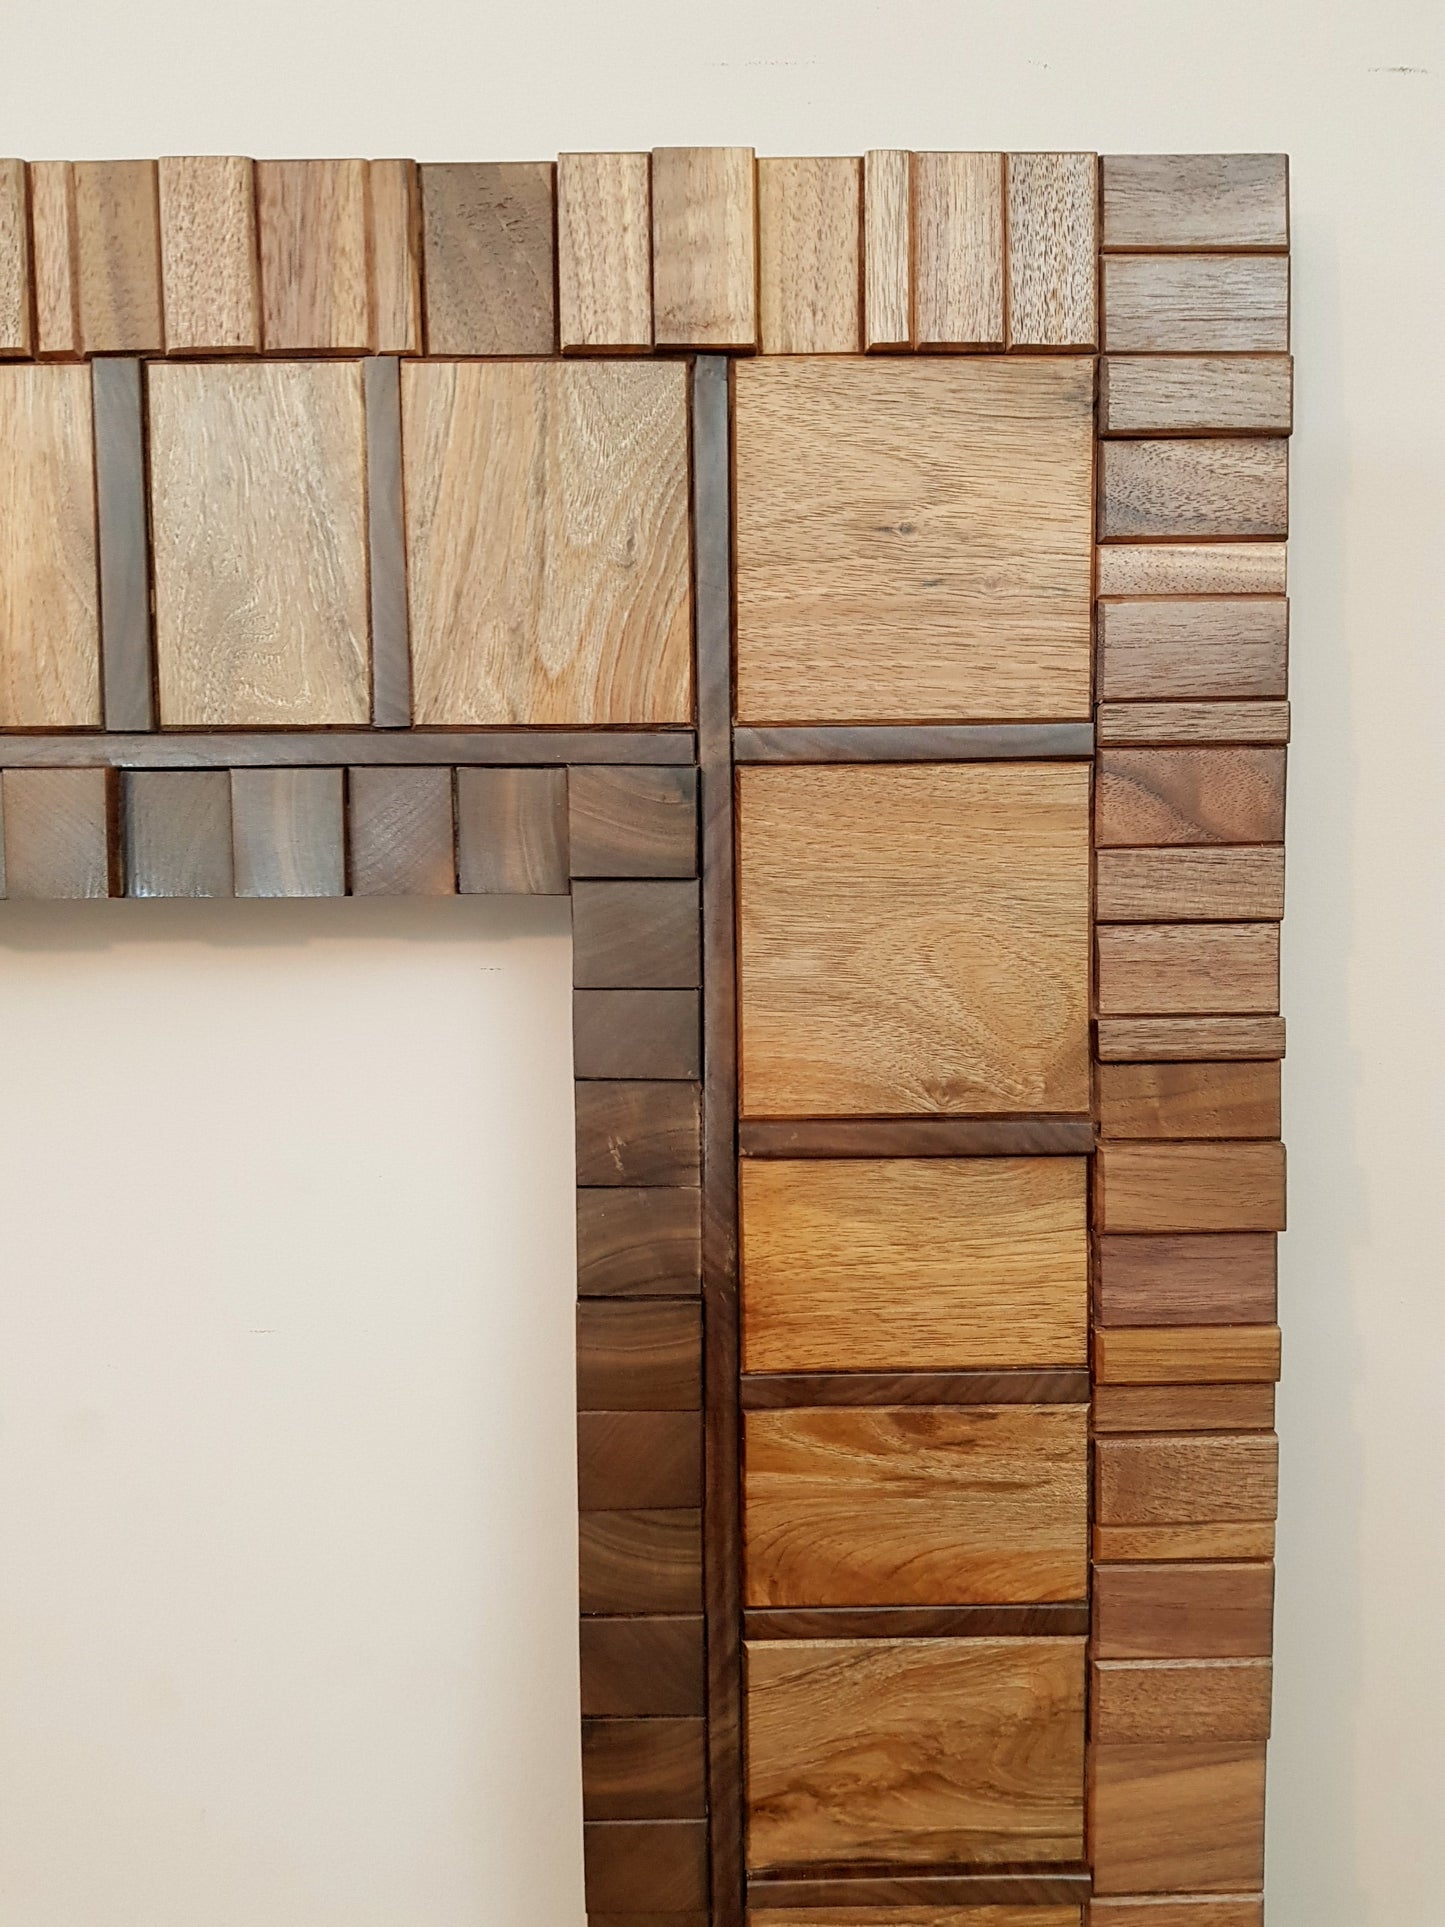 Large mirror frame in end grain mahogany.